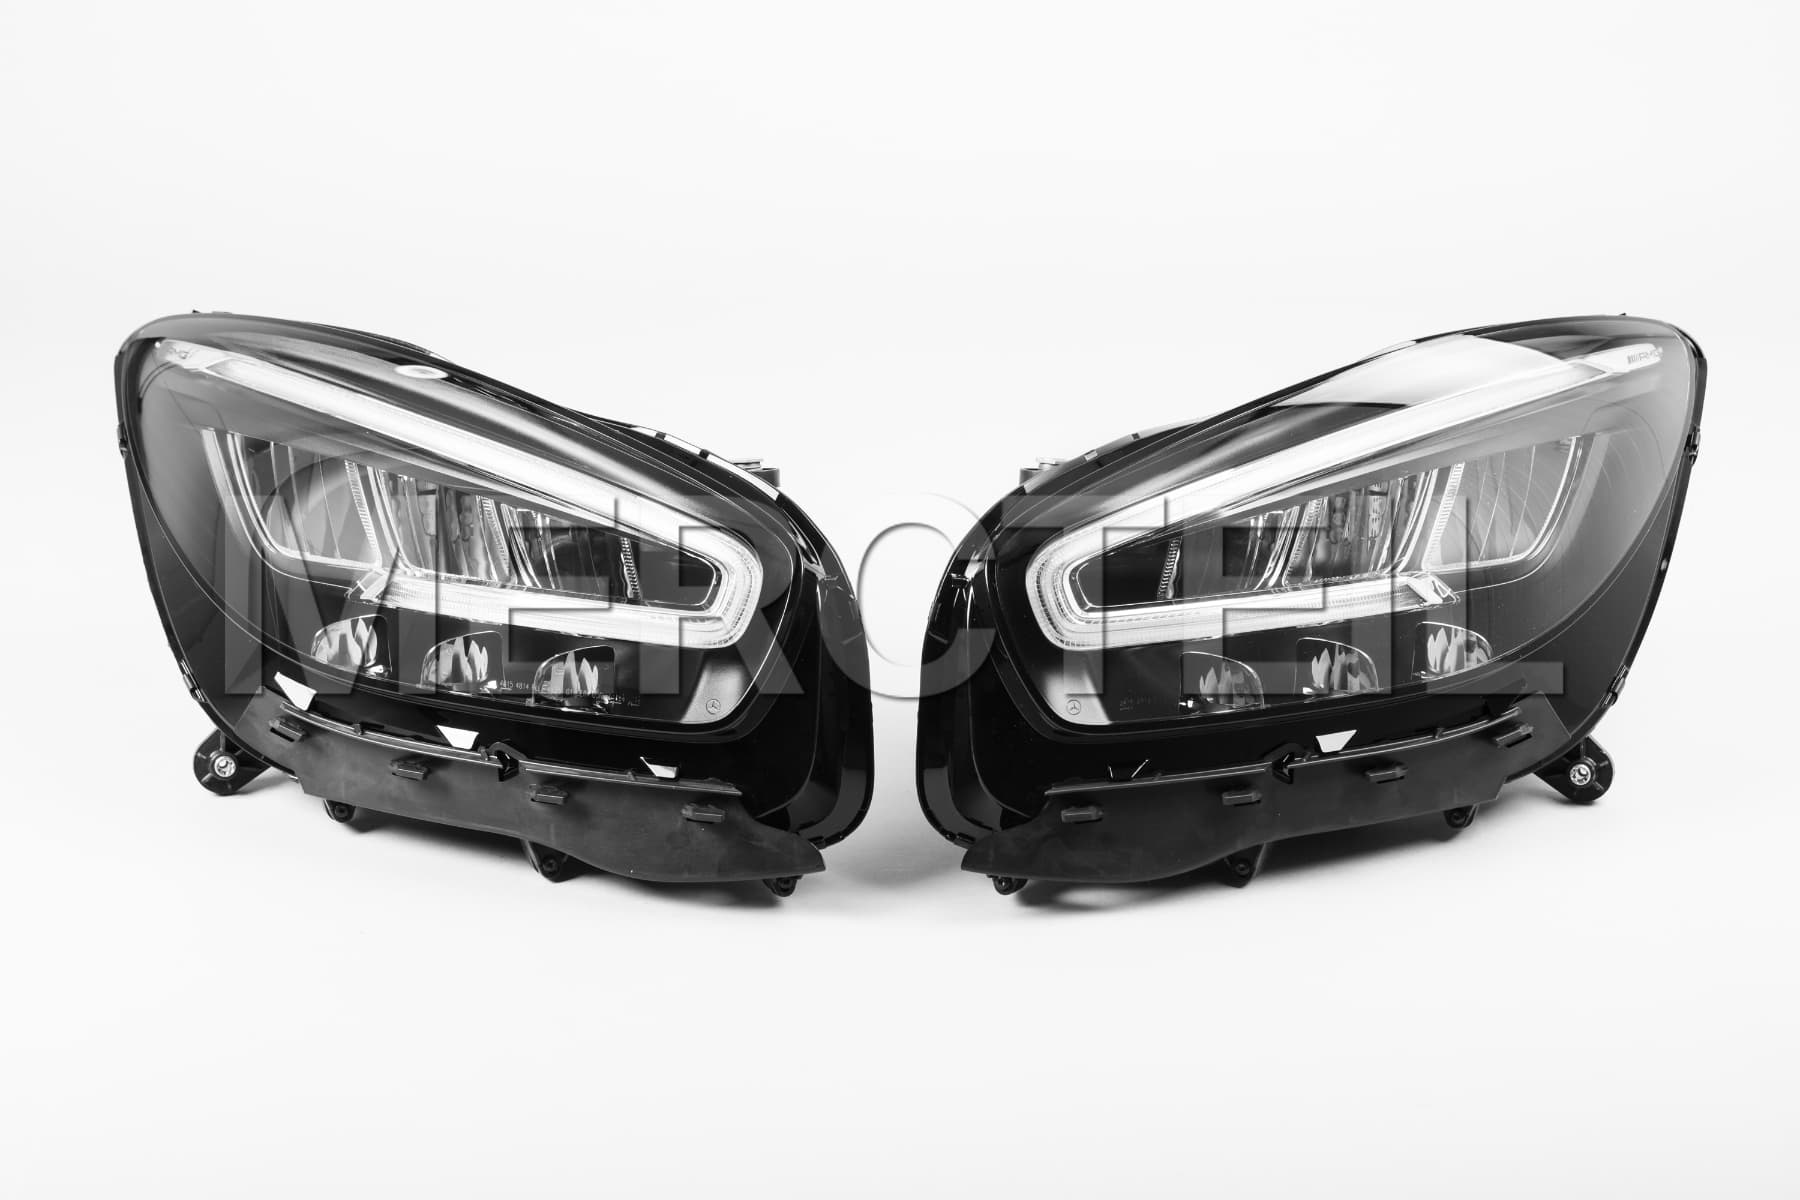 High Performance Dynamic Headlights for AMG GT (part number: A1909061101).